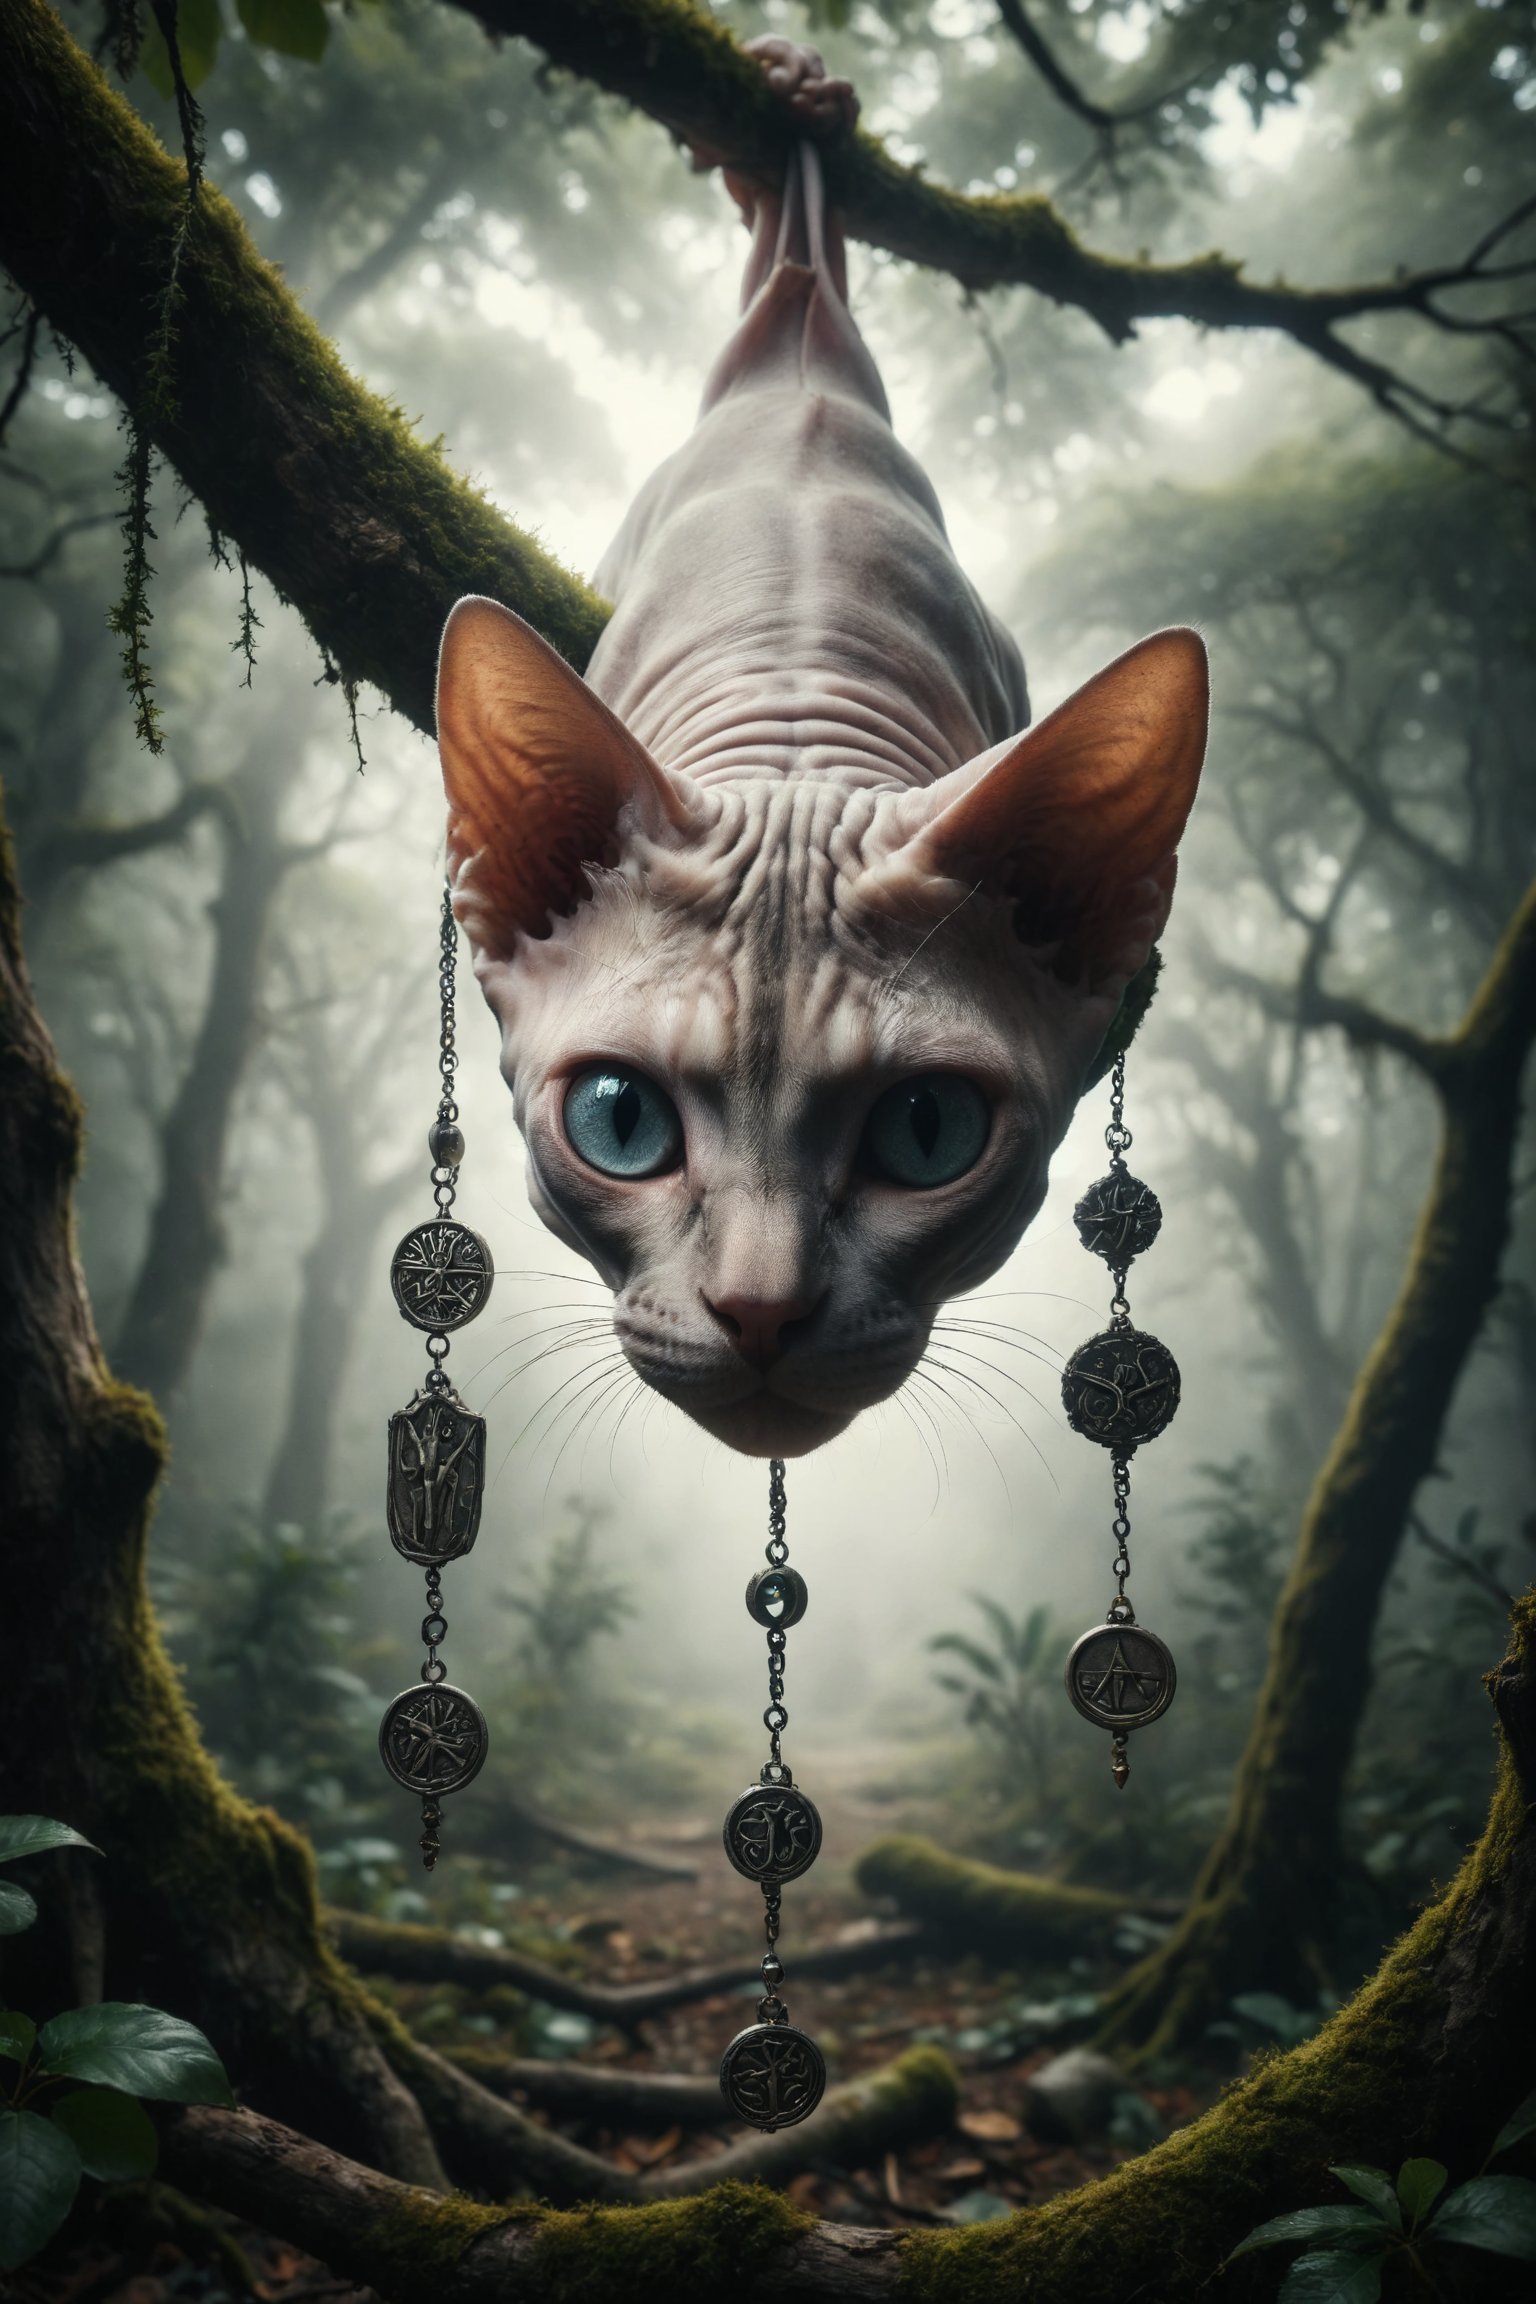 Generate an image of a Sphynx cat hanging upside down from a tree branch, with a serene expression and surrounded by mystical symbols, symbolizing contemplation, sacrifice, and reversed perspective.